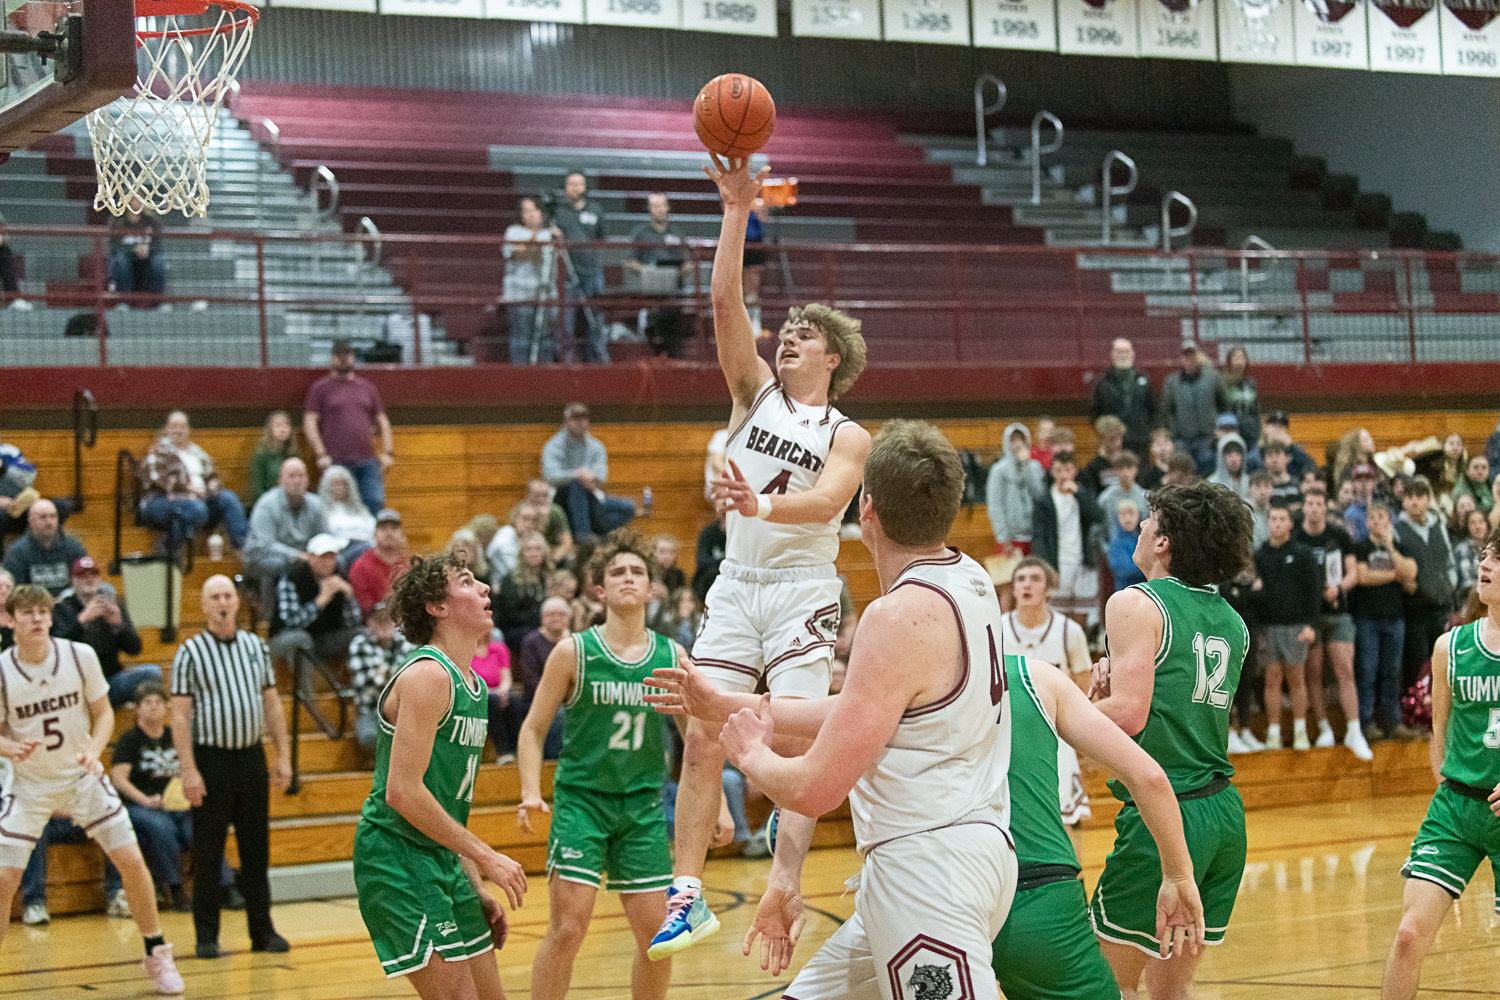 Gage Brumfield puts up a floater during the first half of W.F. West's 71-58 loss to Tumwater on Jan. 11.